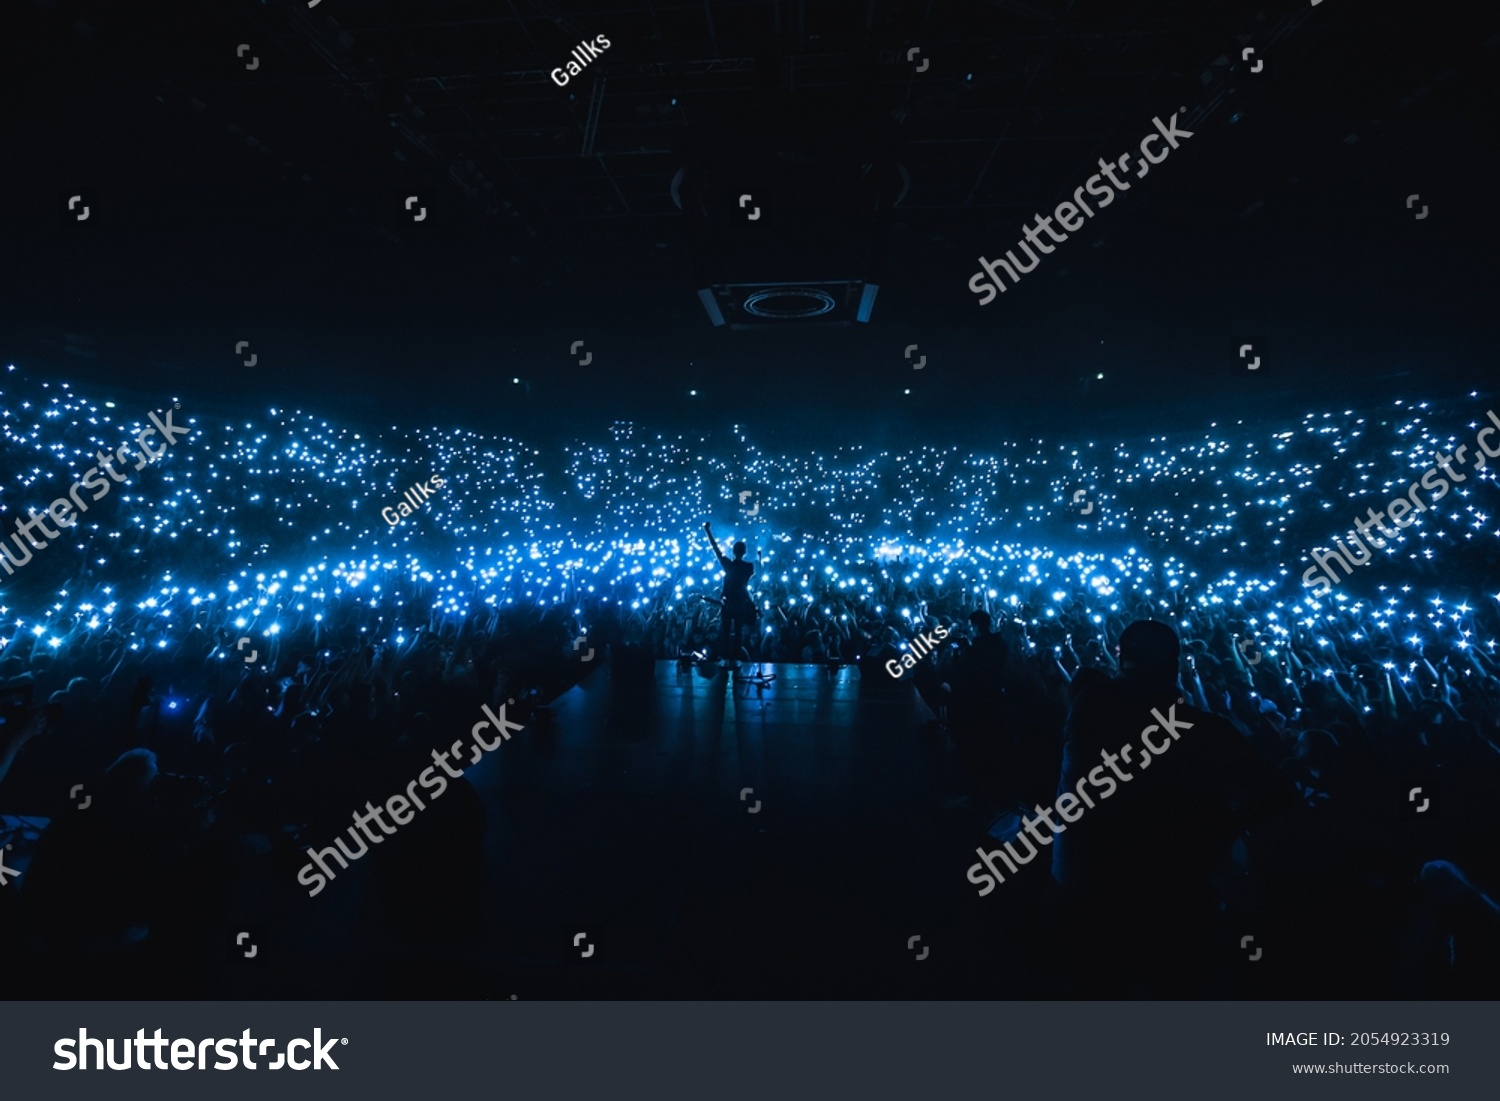 Vocalist in front of crowd on scene in stadium. Bright stage lighting, crowded dance floor. Phone lights at concert. Band blue silhouette crowd. People with cell phone lights. #2054923319